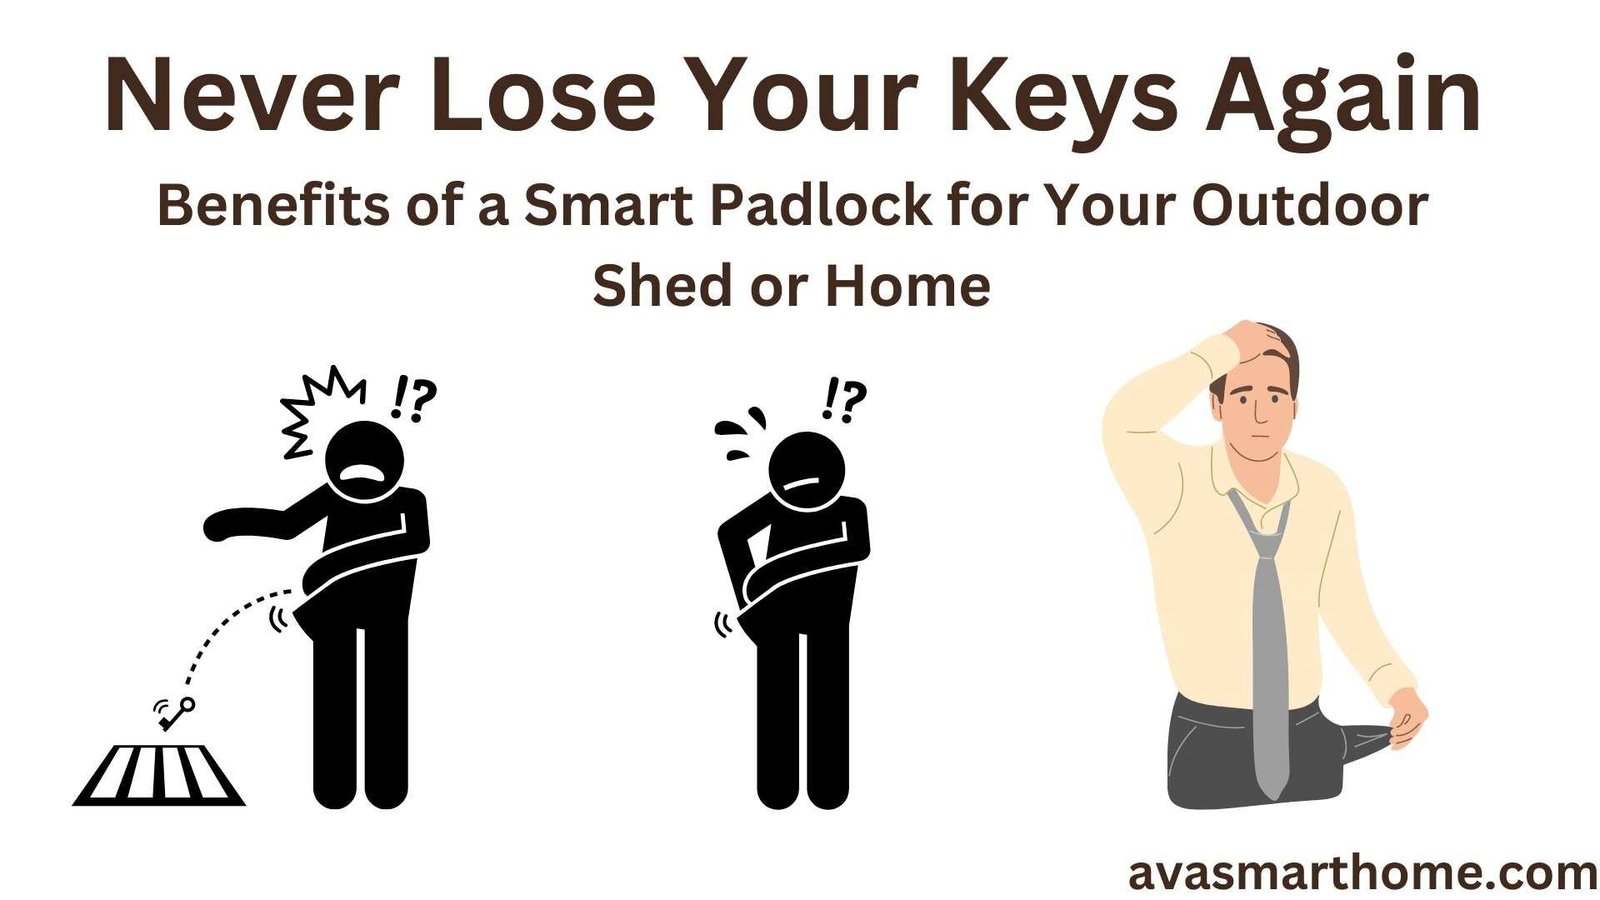 Never Lose Your Keys Again